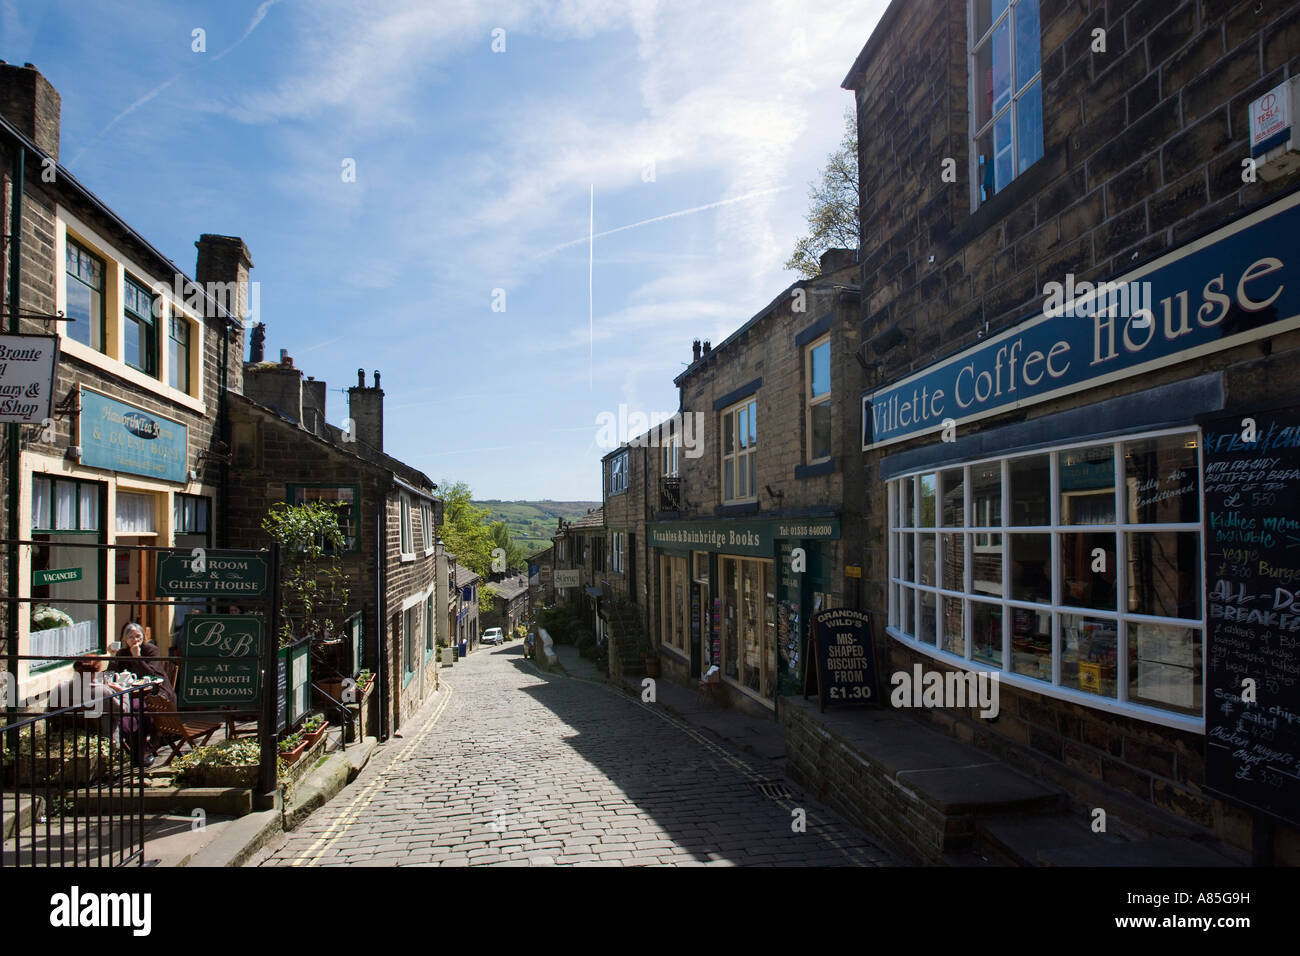 Shops and cafes on the main street in the village centre, Haworth, West Yorkshire, England, UK Stock Photo